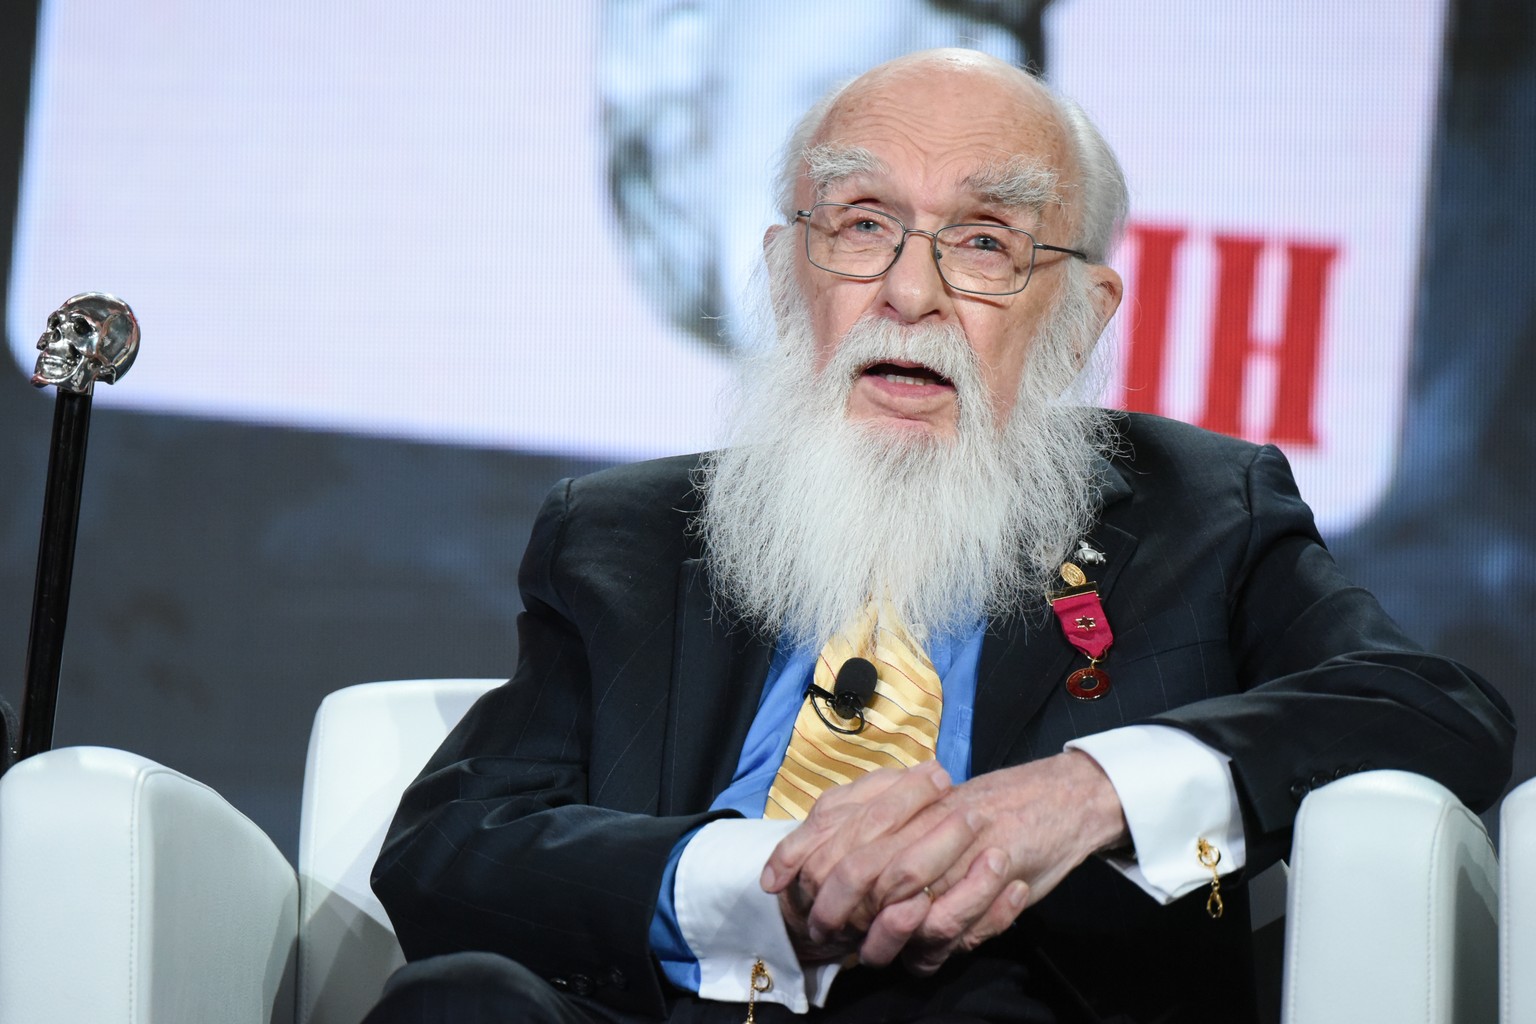 Magician James Randi participates in the &quot;An Honest Liar&quot; panel at the PBS Winter TCA on Monday, Jan. 18, 2016, in Pasadena, Calif. (Photo by Richard Shotwell/Invision/AP)